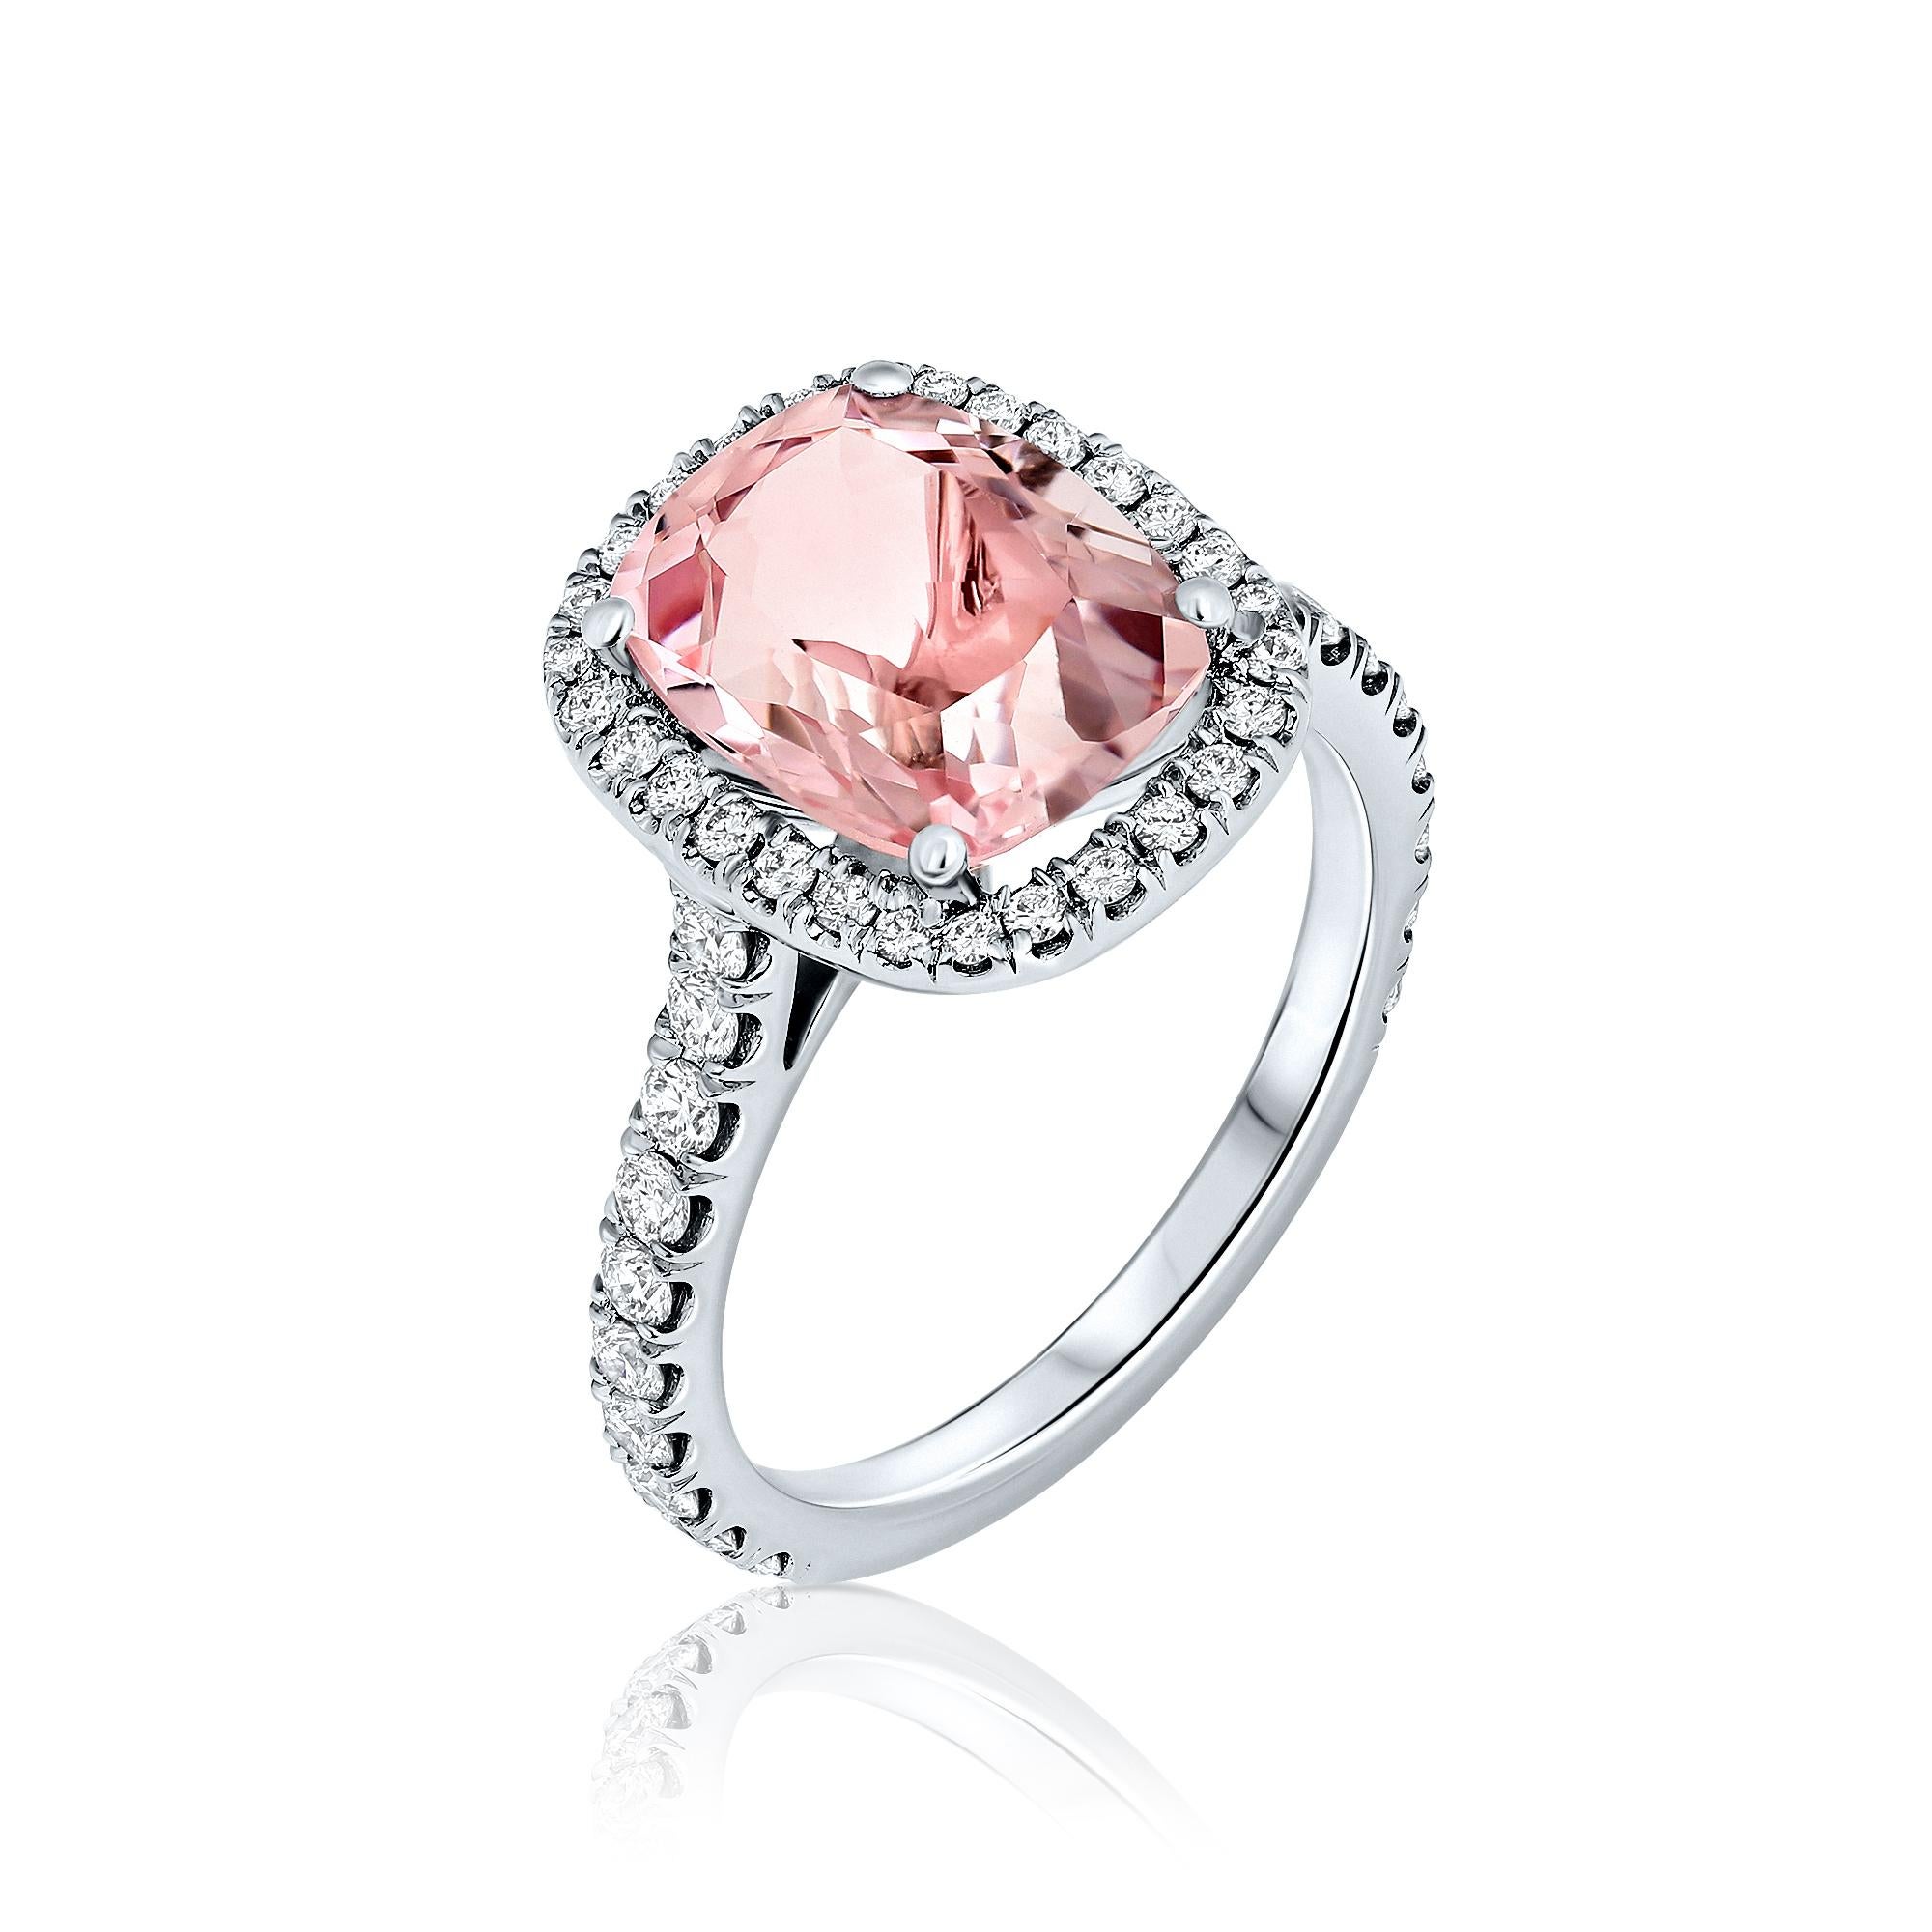 Cocktail ring style showcasing a 3.36 carat cushion cut Pink Morganite. The classic design brings out the beauty of the center stone with the surrounding 48 round brilliant diamonds, set in a polished 18k white gold mounting. A truly meaningful